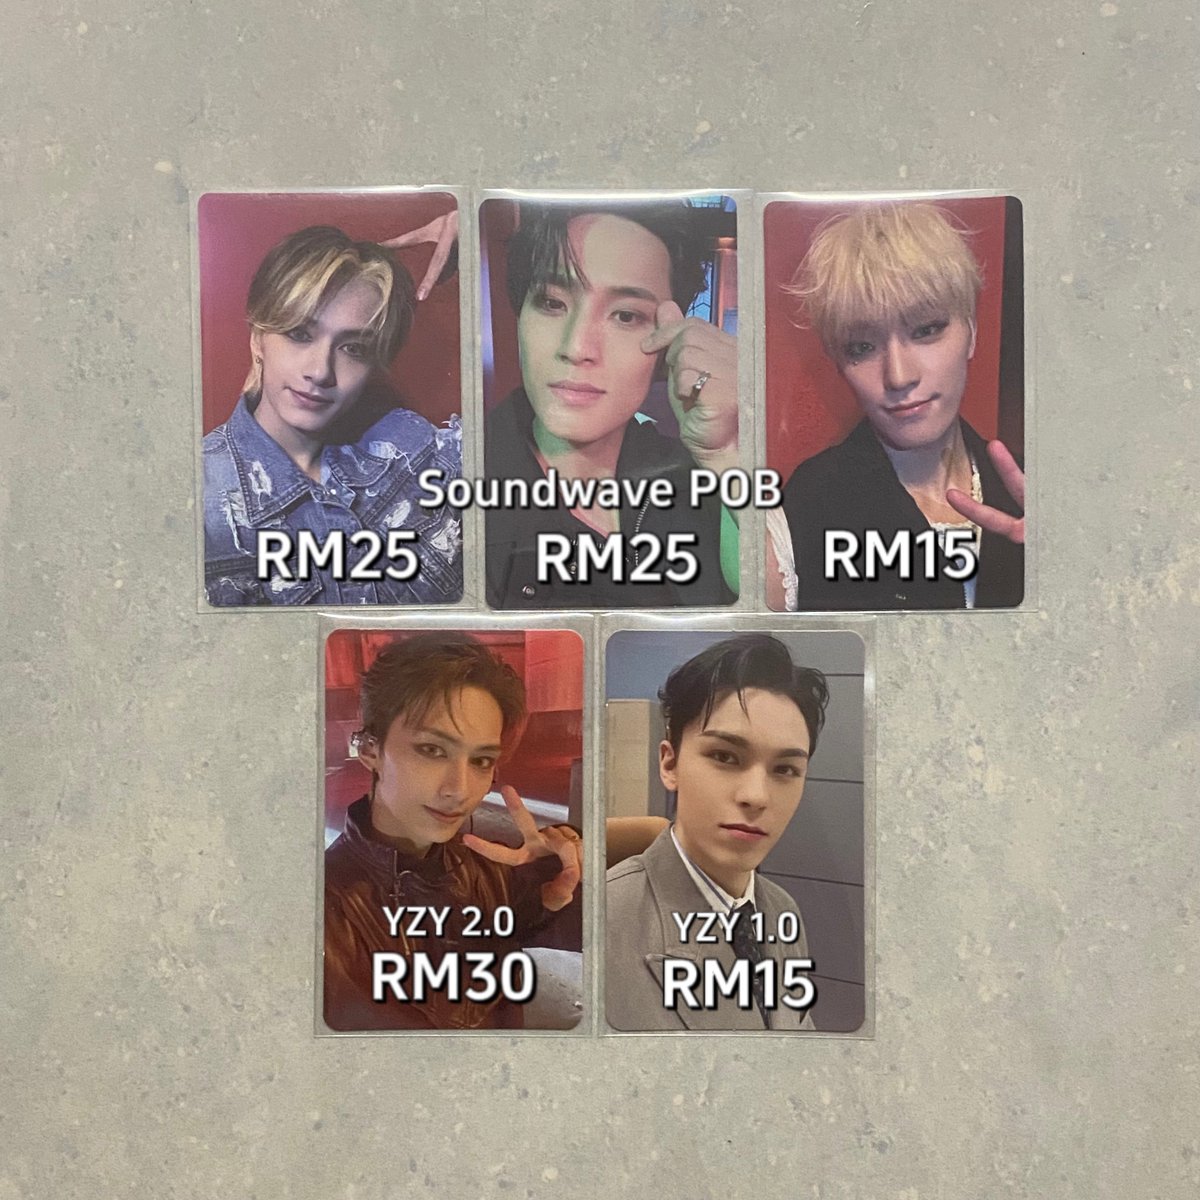 [ WTS | HELP RT ] 🇲🇾 SVT Photocards 💰 Price stated exc postage 🚚 WM RM8 / EM RM9.50 👼🏻 Can meet-up during #dreamofYOON 🍊 Seungkwan POB has to tie item RM8 or below 🙅🏻‍♀️ No reservations. FCFS. DM to purchase 💌 #pasarseventeen #pasarsvt